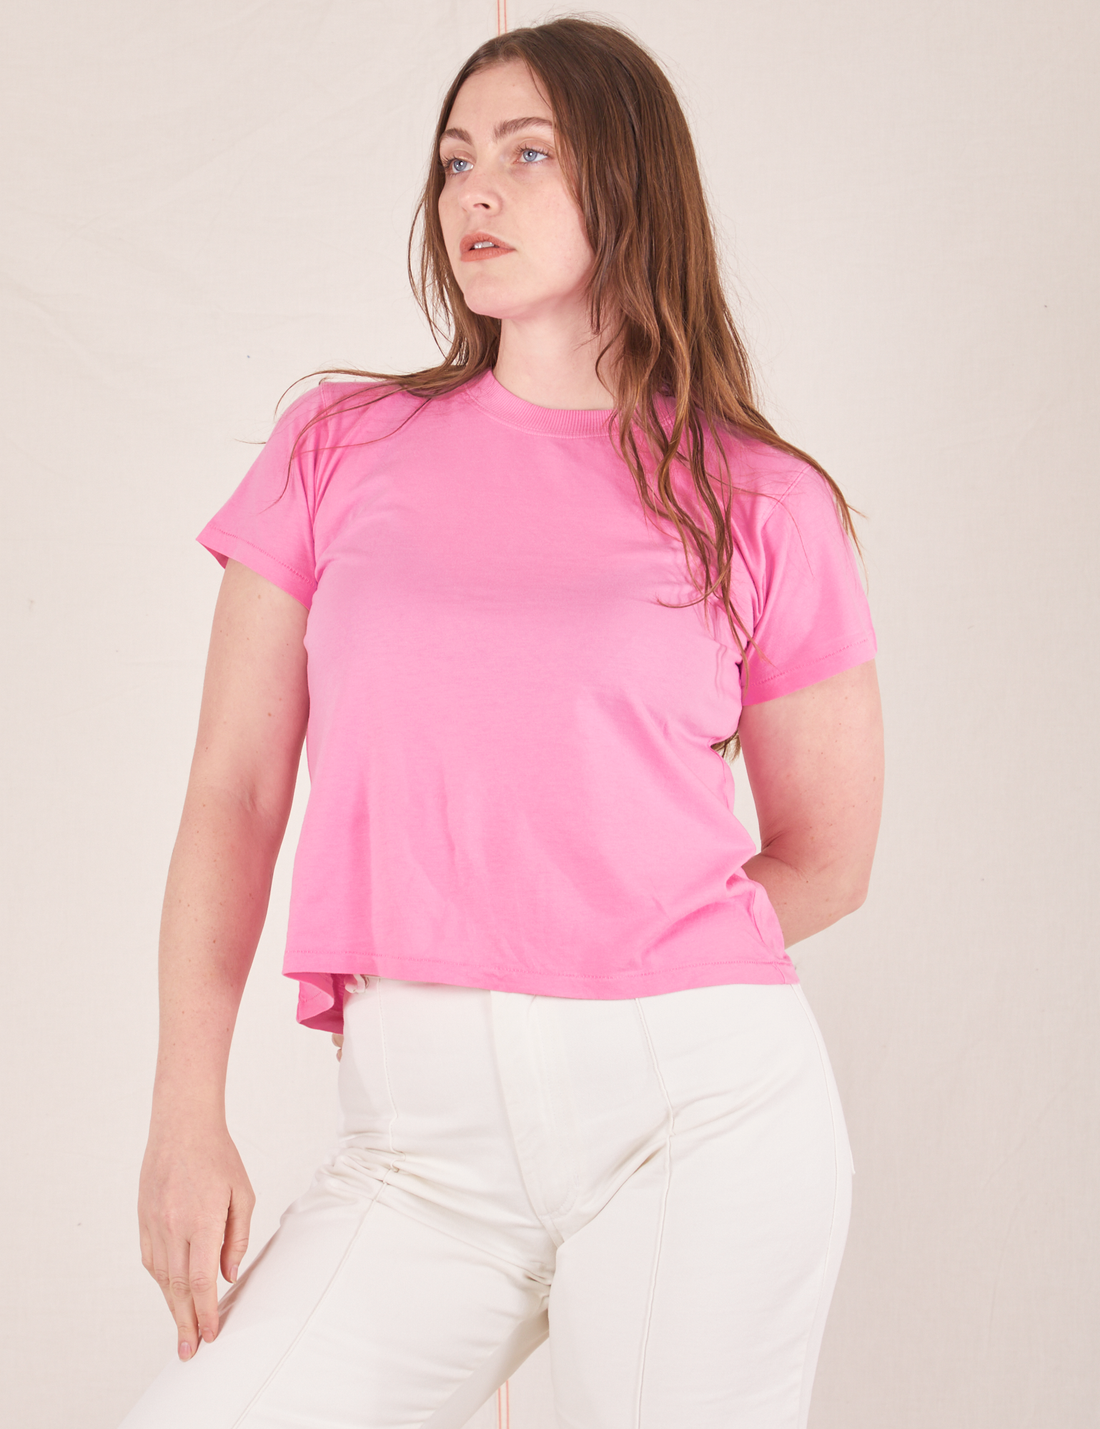 Allison is wearing XXS Organic Vintage Tee in Bubblegum Pink paired with vintage off-white Western Pants